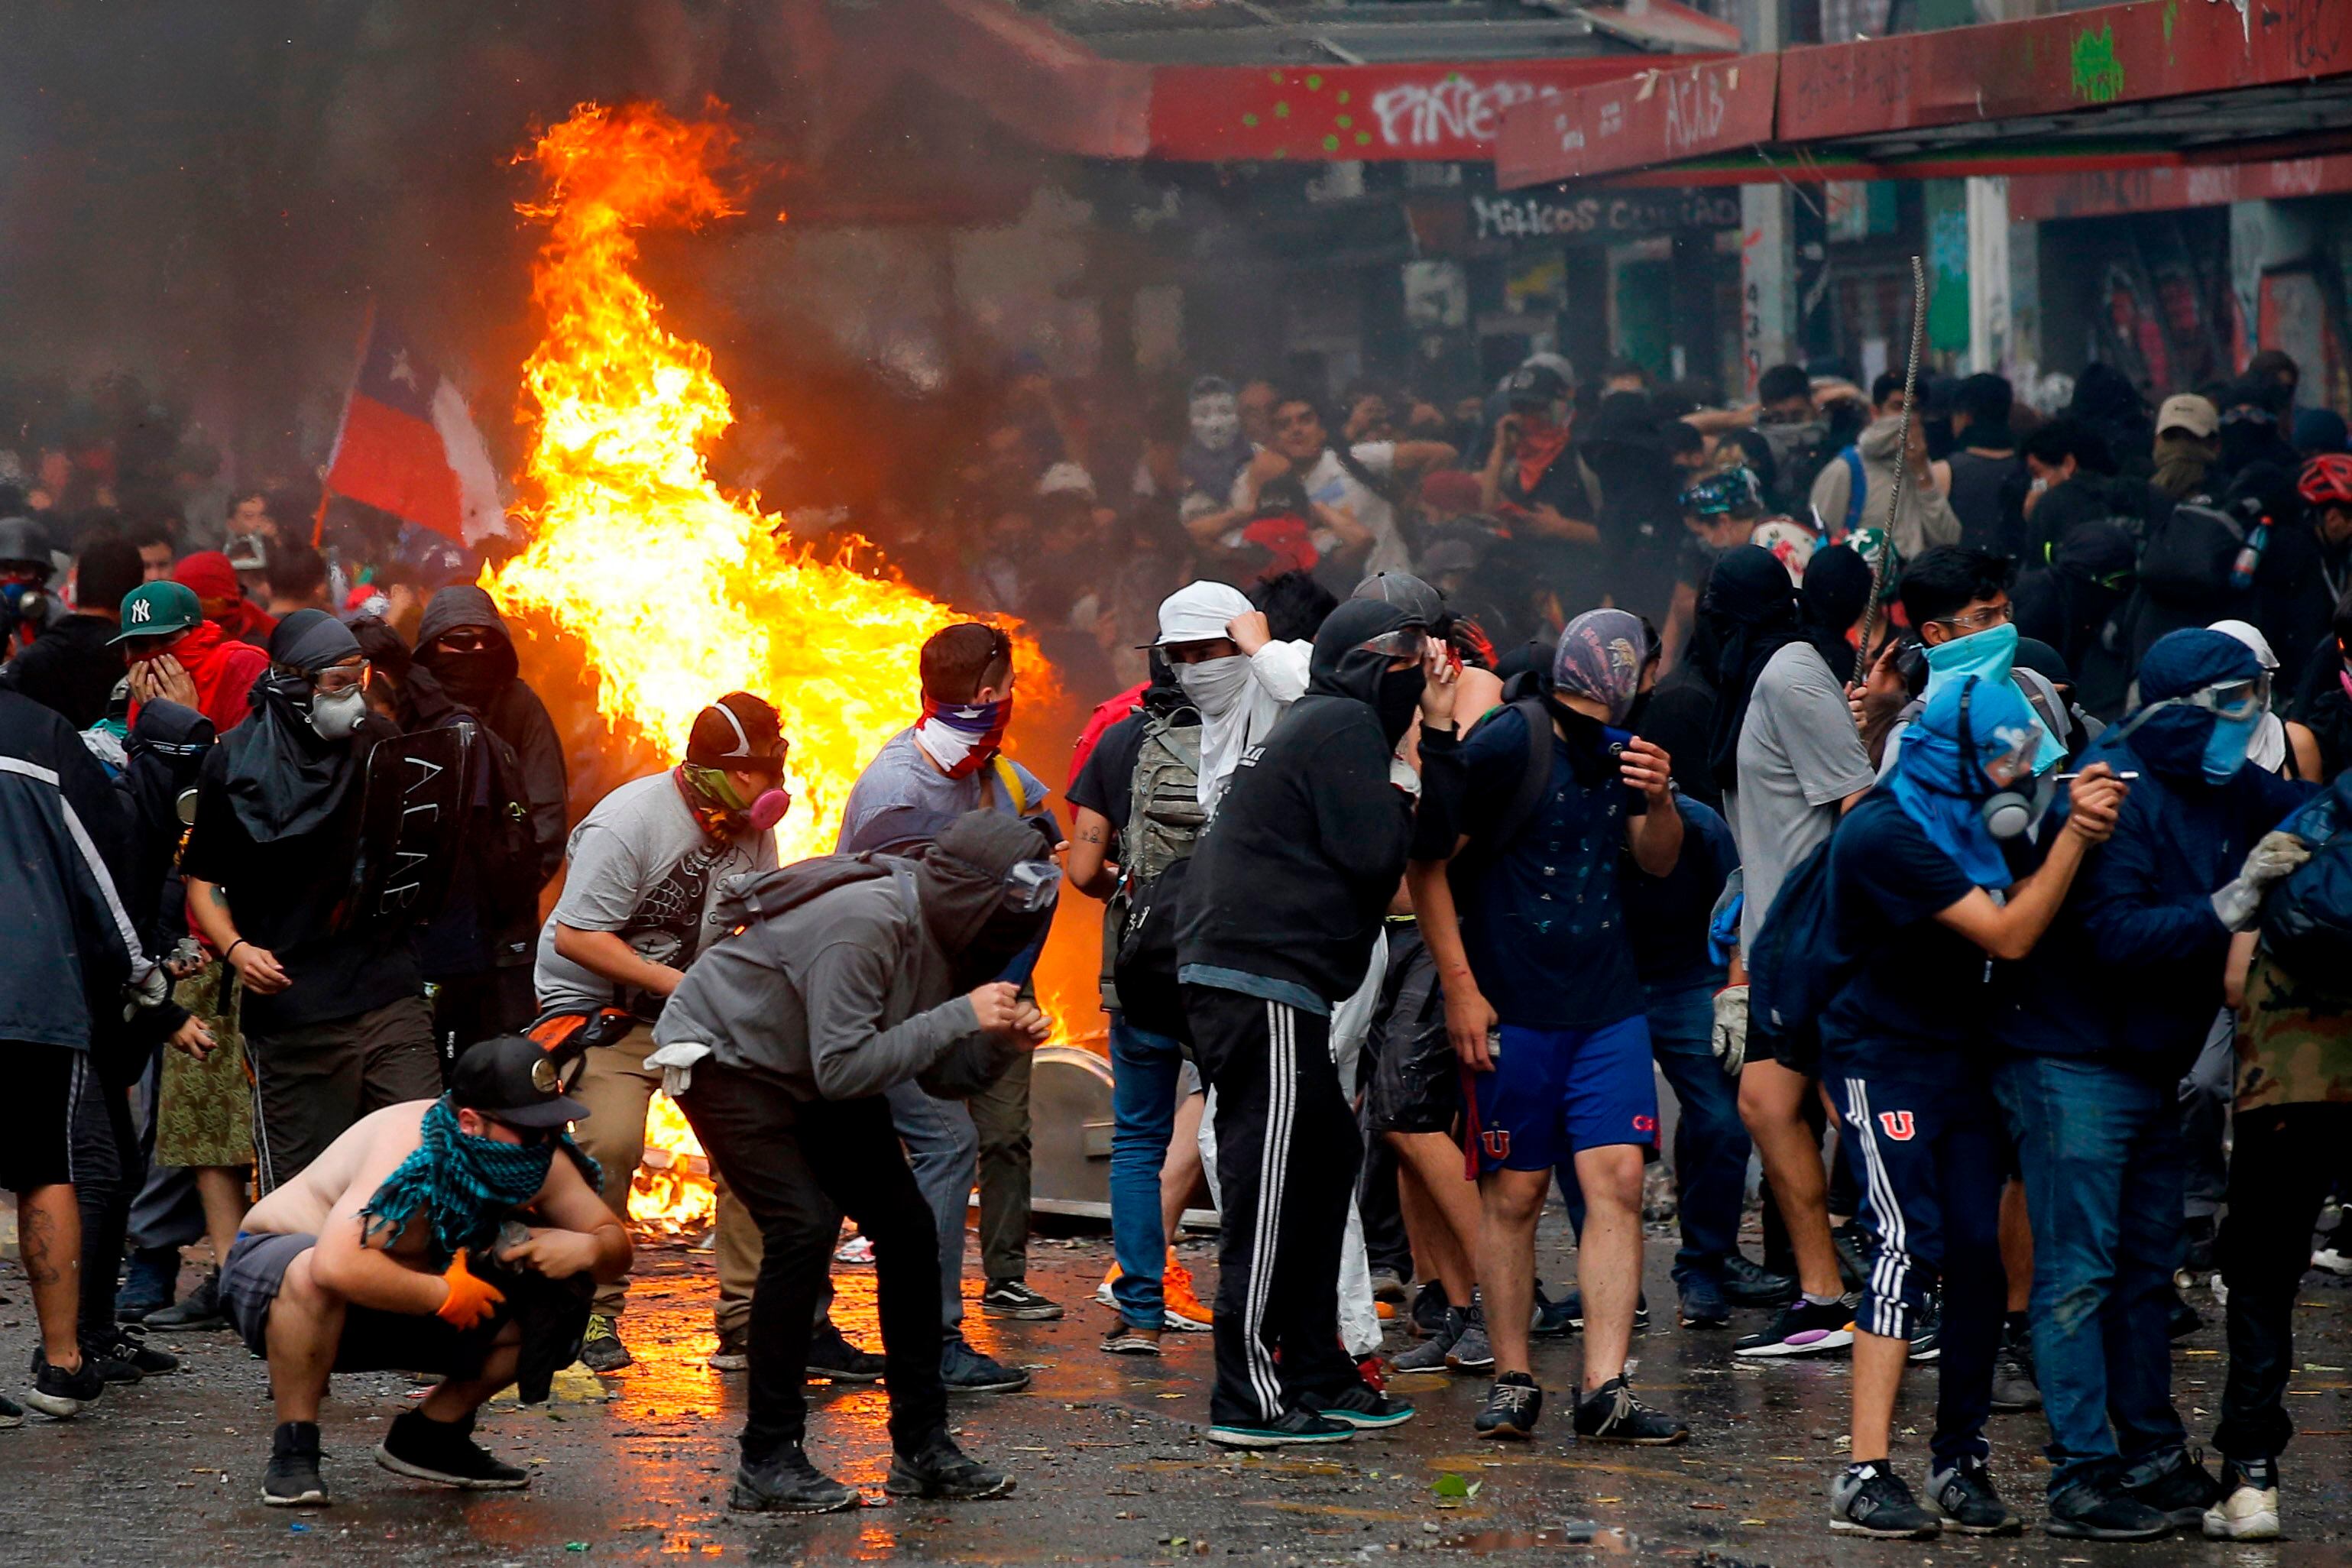 Demonstrators clash with riot police during a protest against the government of Chilean President Sebastián Piñera in Santiago, on November 8, 2019. (Photo: AFP / JAVIER TORRES)